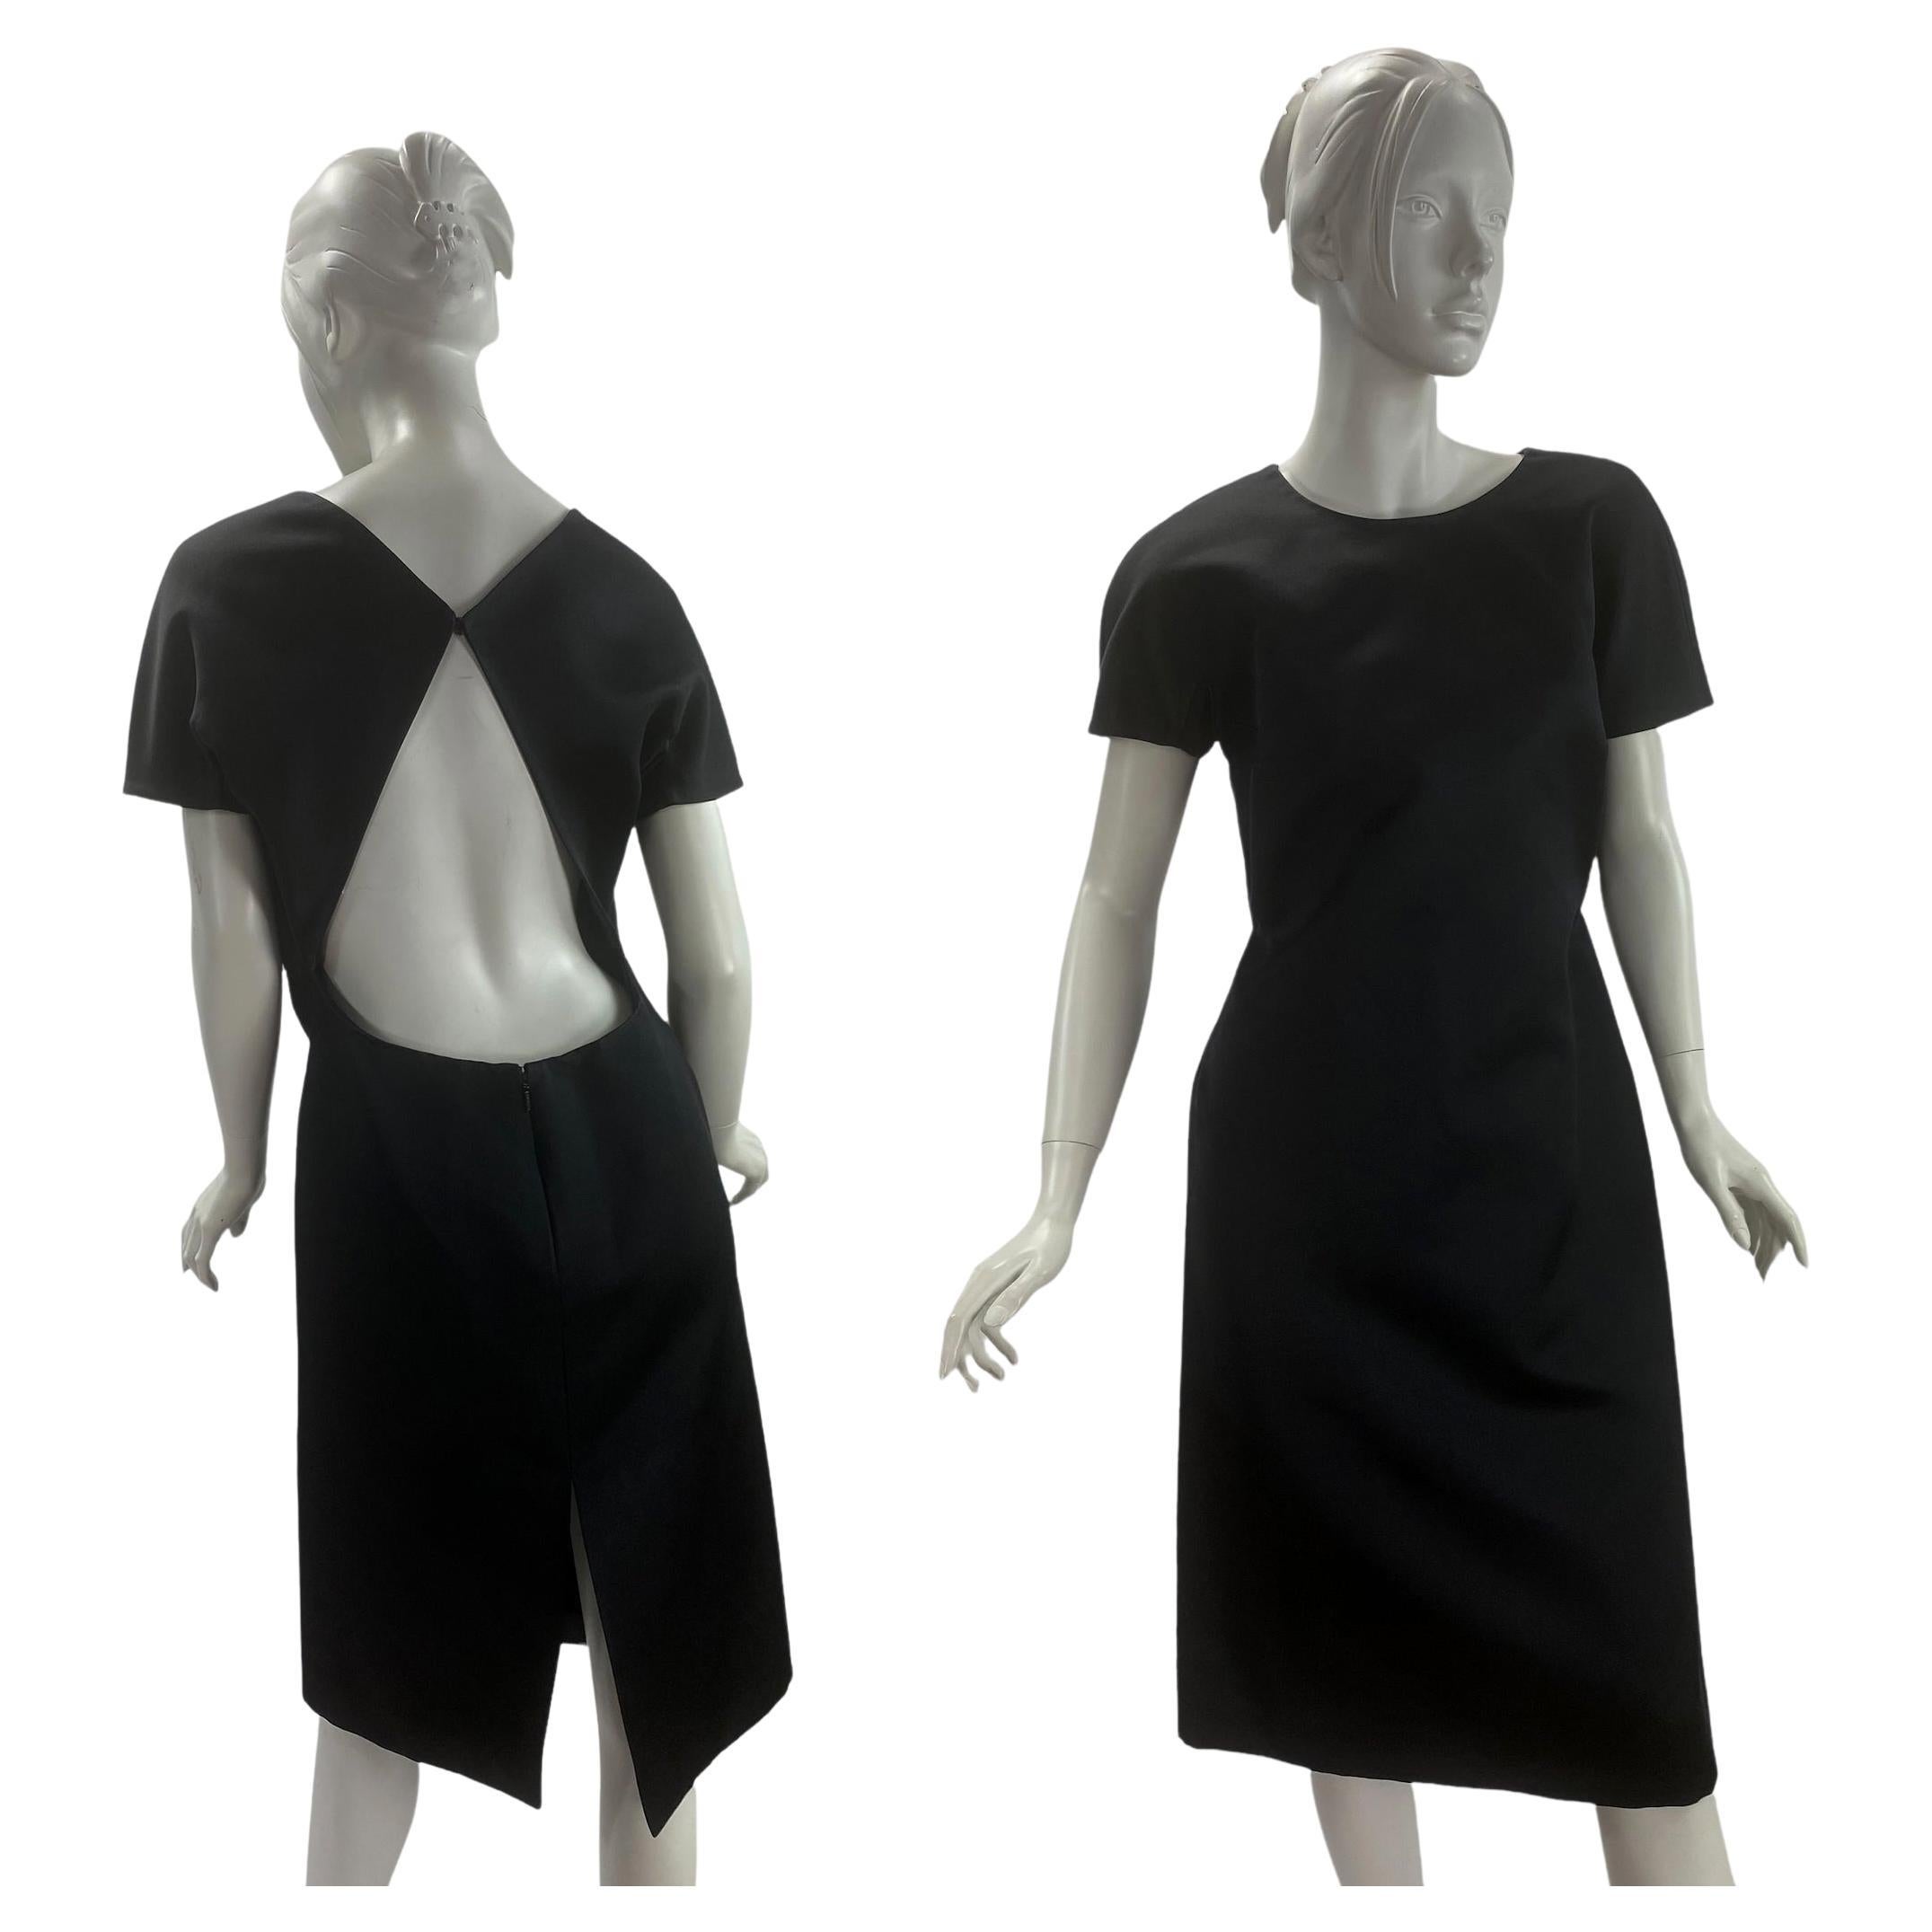 2001 Campaigner Tom Ford for Gucci Robe noire dos nu Taille italienne 44 en vente